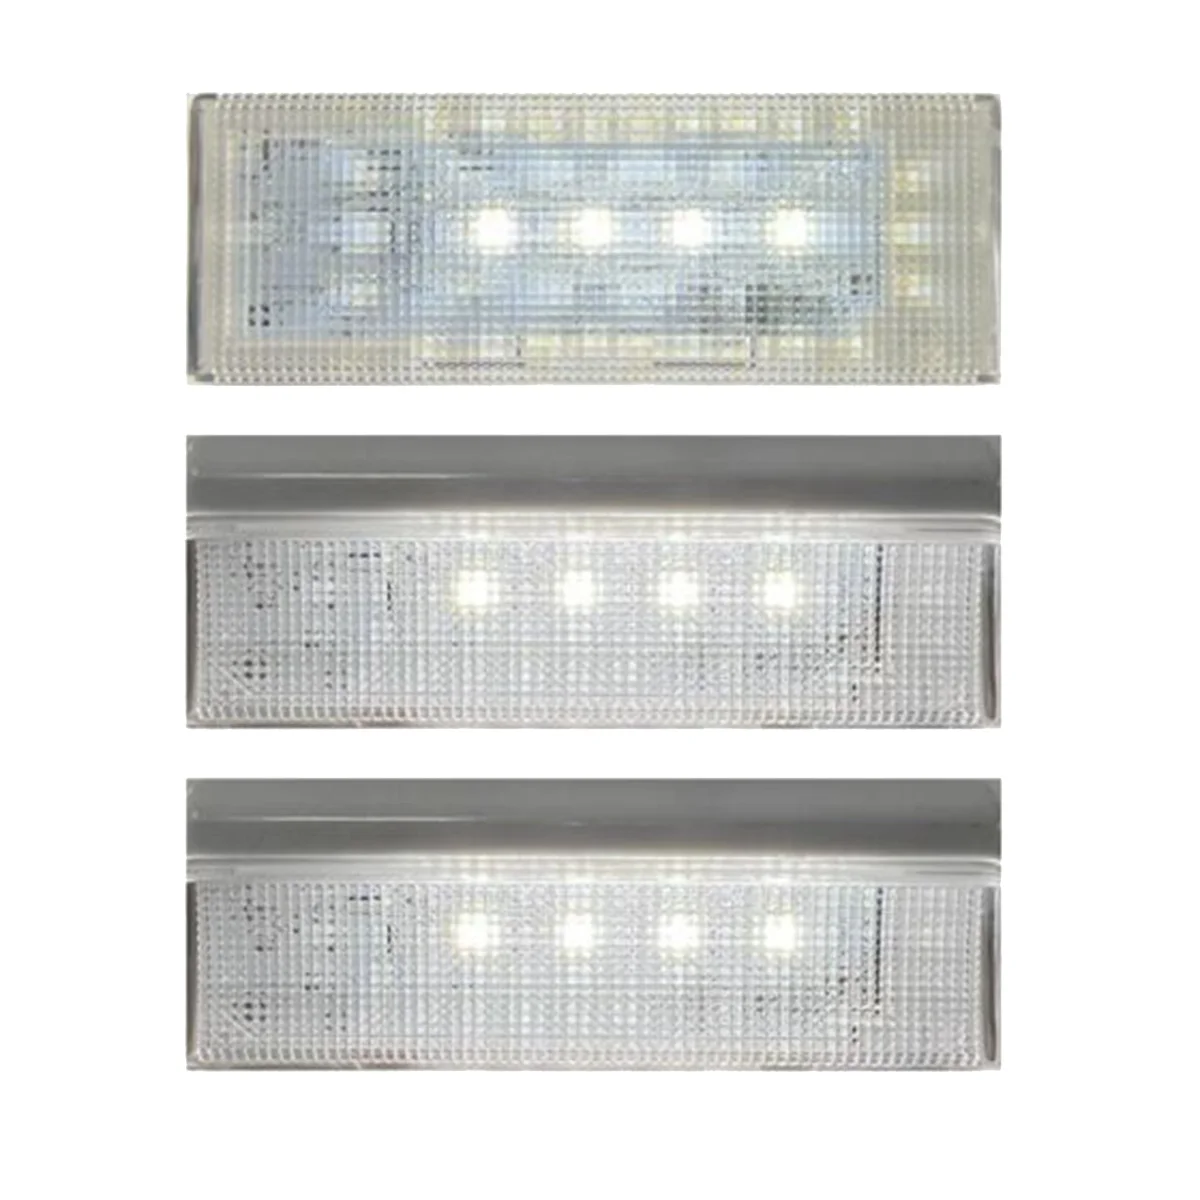 

2 Pcs W10515057 & 1 Pc W10515058 LED Light Set with Tapered Lens and Bezel for Whirlpool Kenmore Maytag KitchenAid